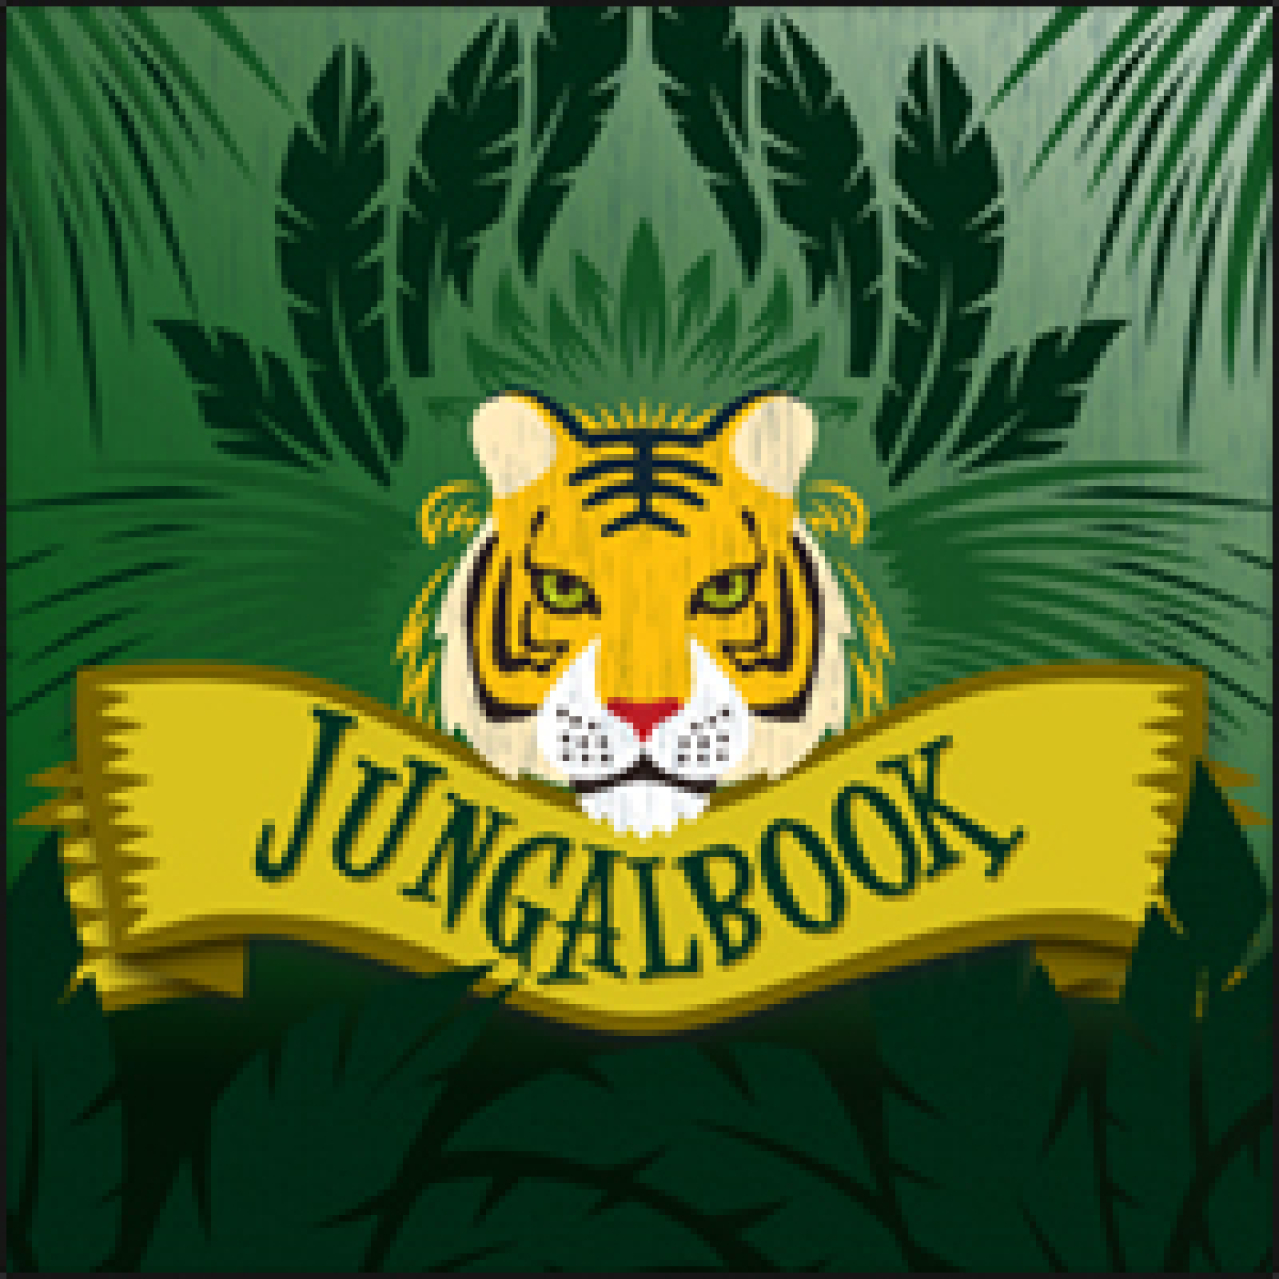 jungalbook logo Broadway shows and tickets